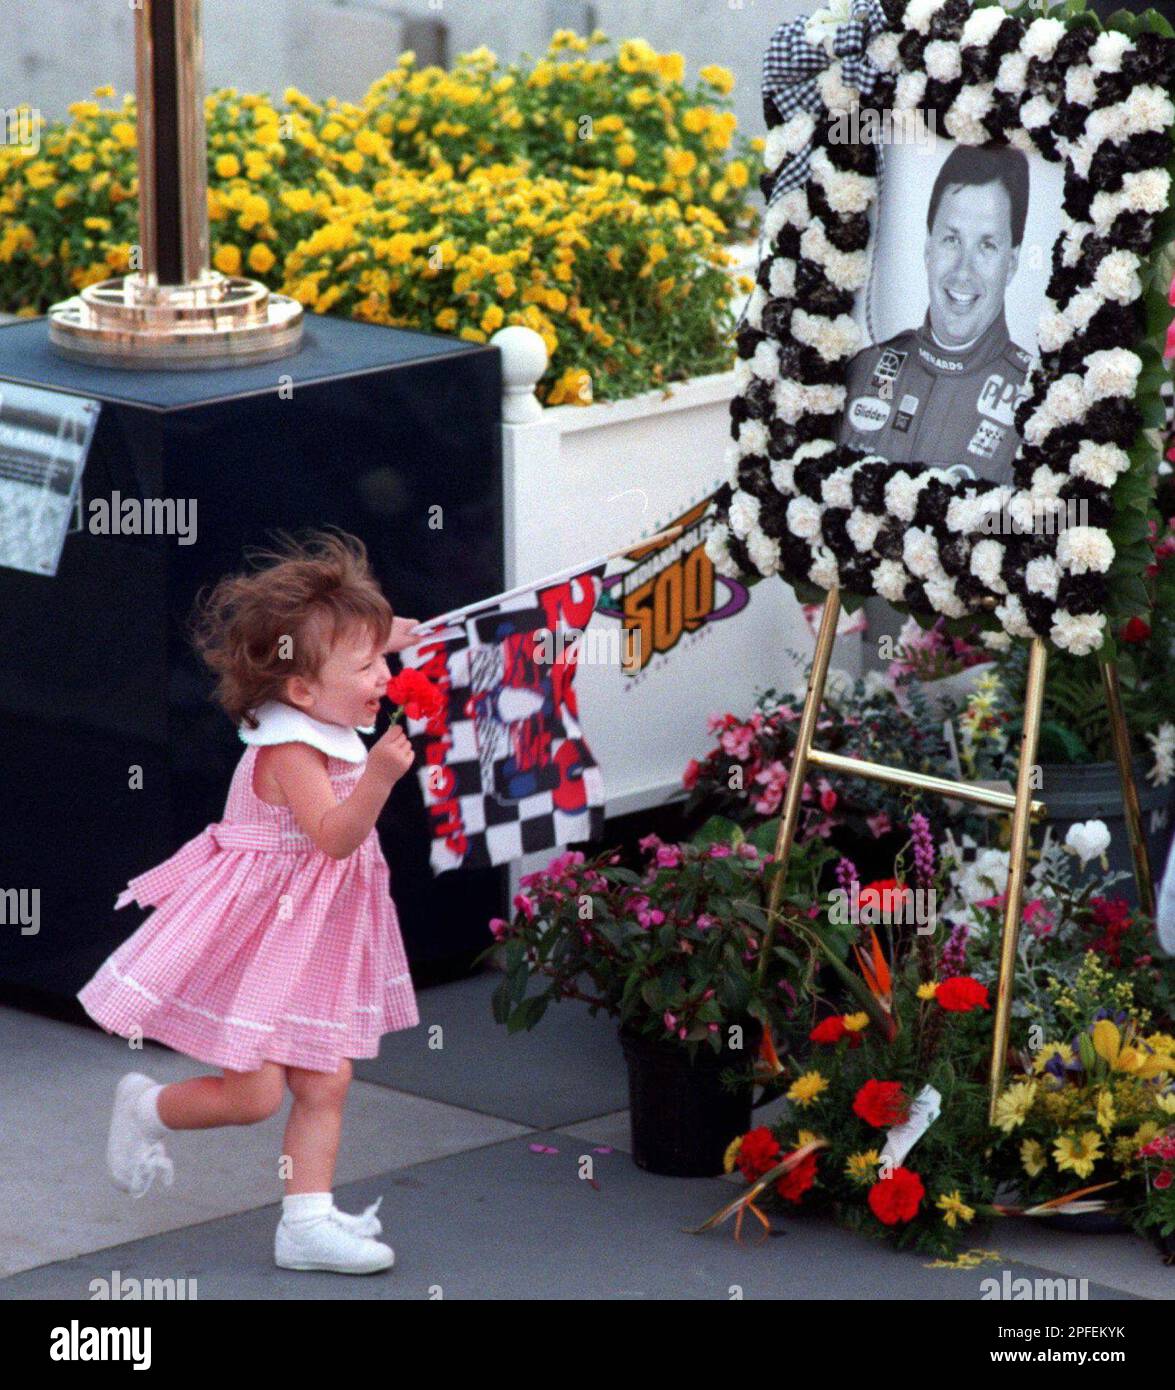 https://c8.alamy.com/comp/2PFEKYK/two-year-old-carly-brayton-runs-toward-a-picture-of-her-father-scott-during-a-memorial-service-at-the-indianapolis-motor-speedway-saturday-may-18-1996-when-the-track-closed-for-the-day-after-qualifications-brayton-was-killed-friday-when-his-backup-car-crashed-into-the-turn-two-wall-ap-phototom-strickland-2PFEKYK.jpg